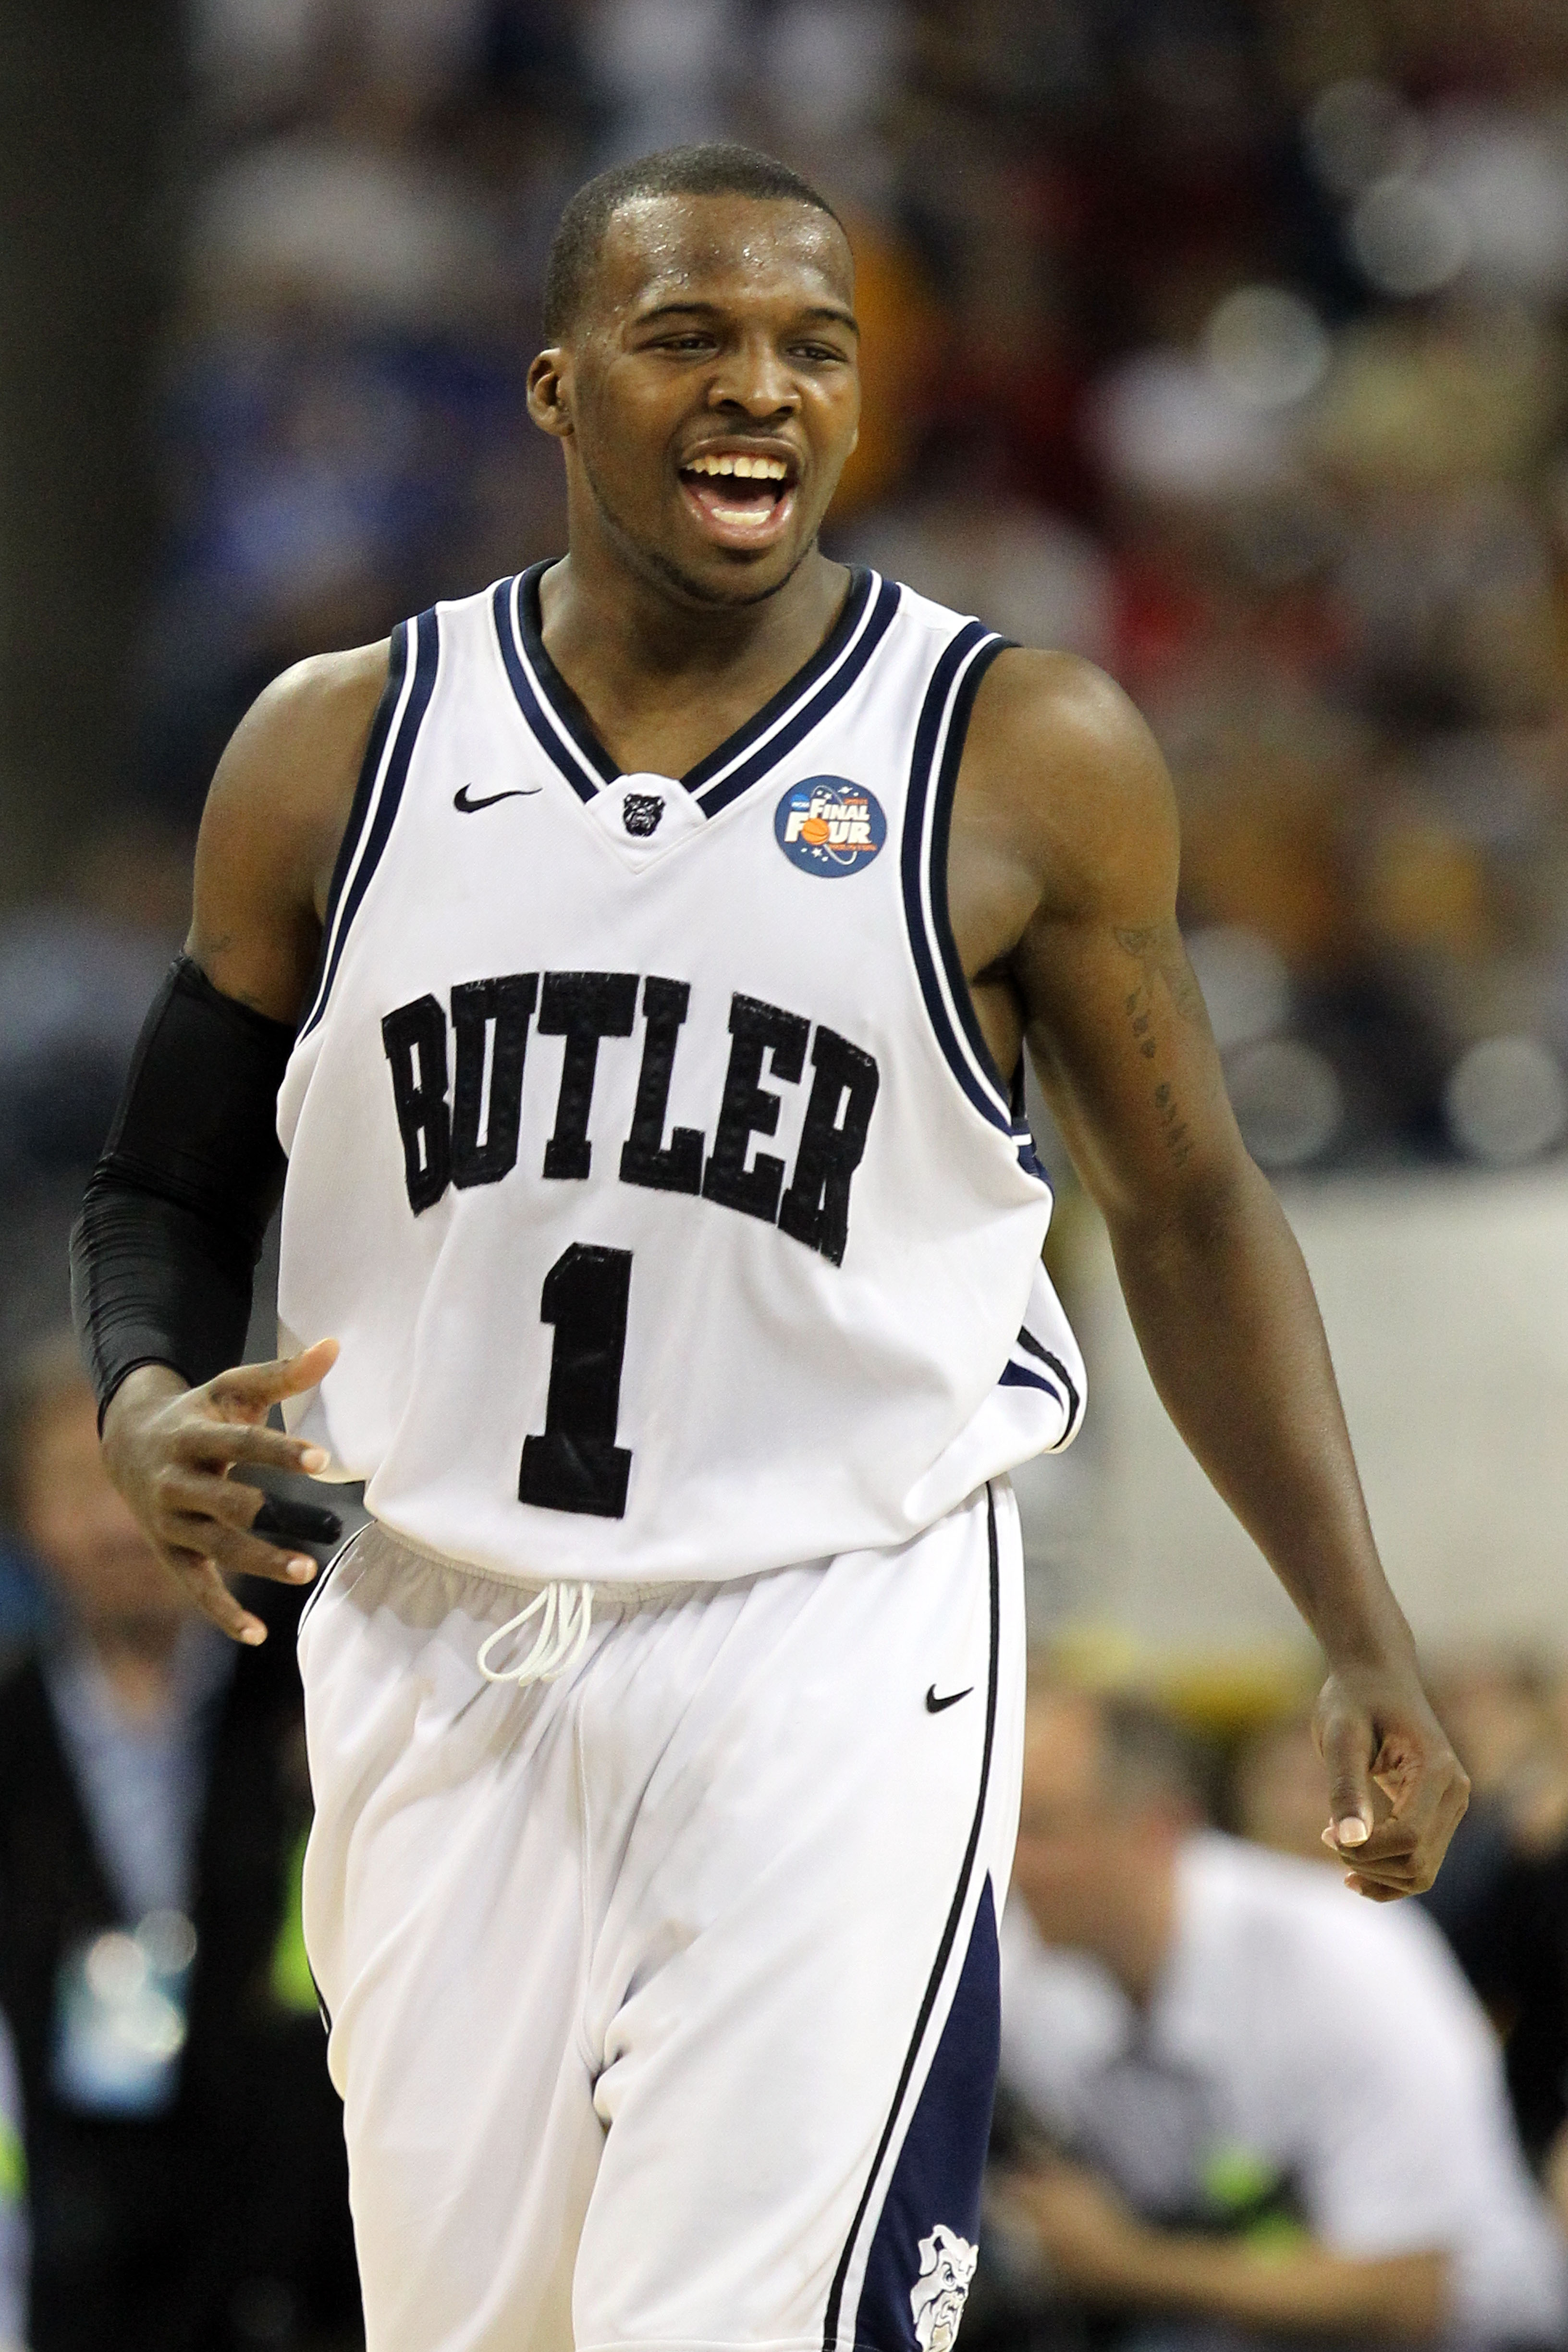 HOUSTON, TX - APRIL 02:  Shelvin Mack #1 of the Butler Bulldogs reacts against the Virginia Commonwealth Rams during the National Semifinal game of the 2011 NCAA Division I Men's Basketball Championship at Reliant Stadium on April 2, 2011 in Houston, Texa